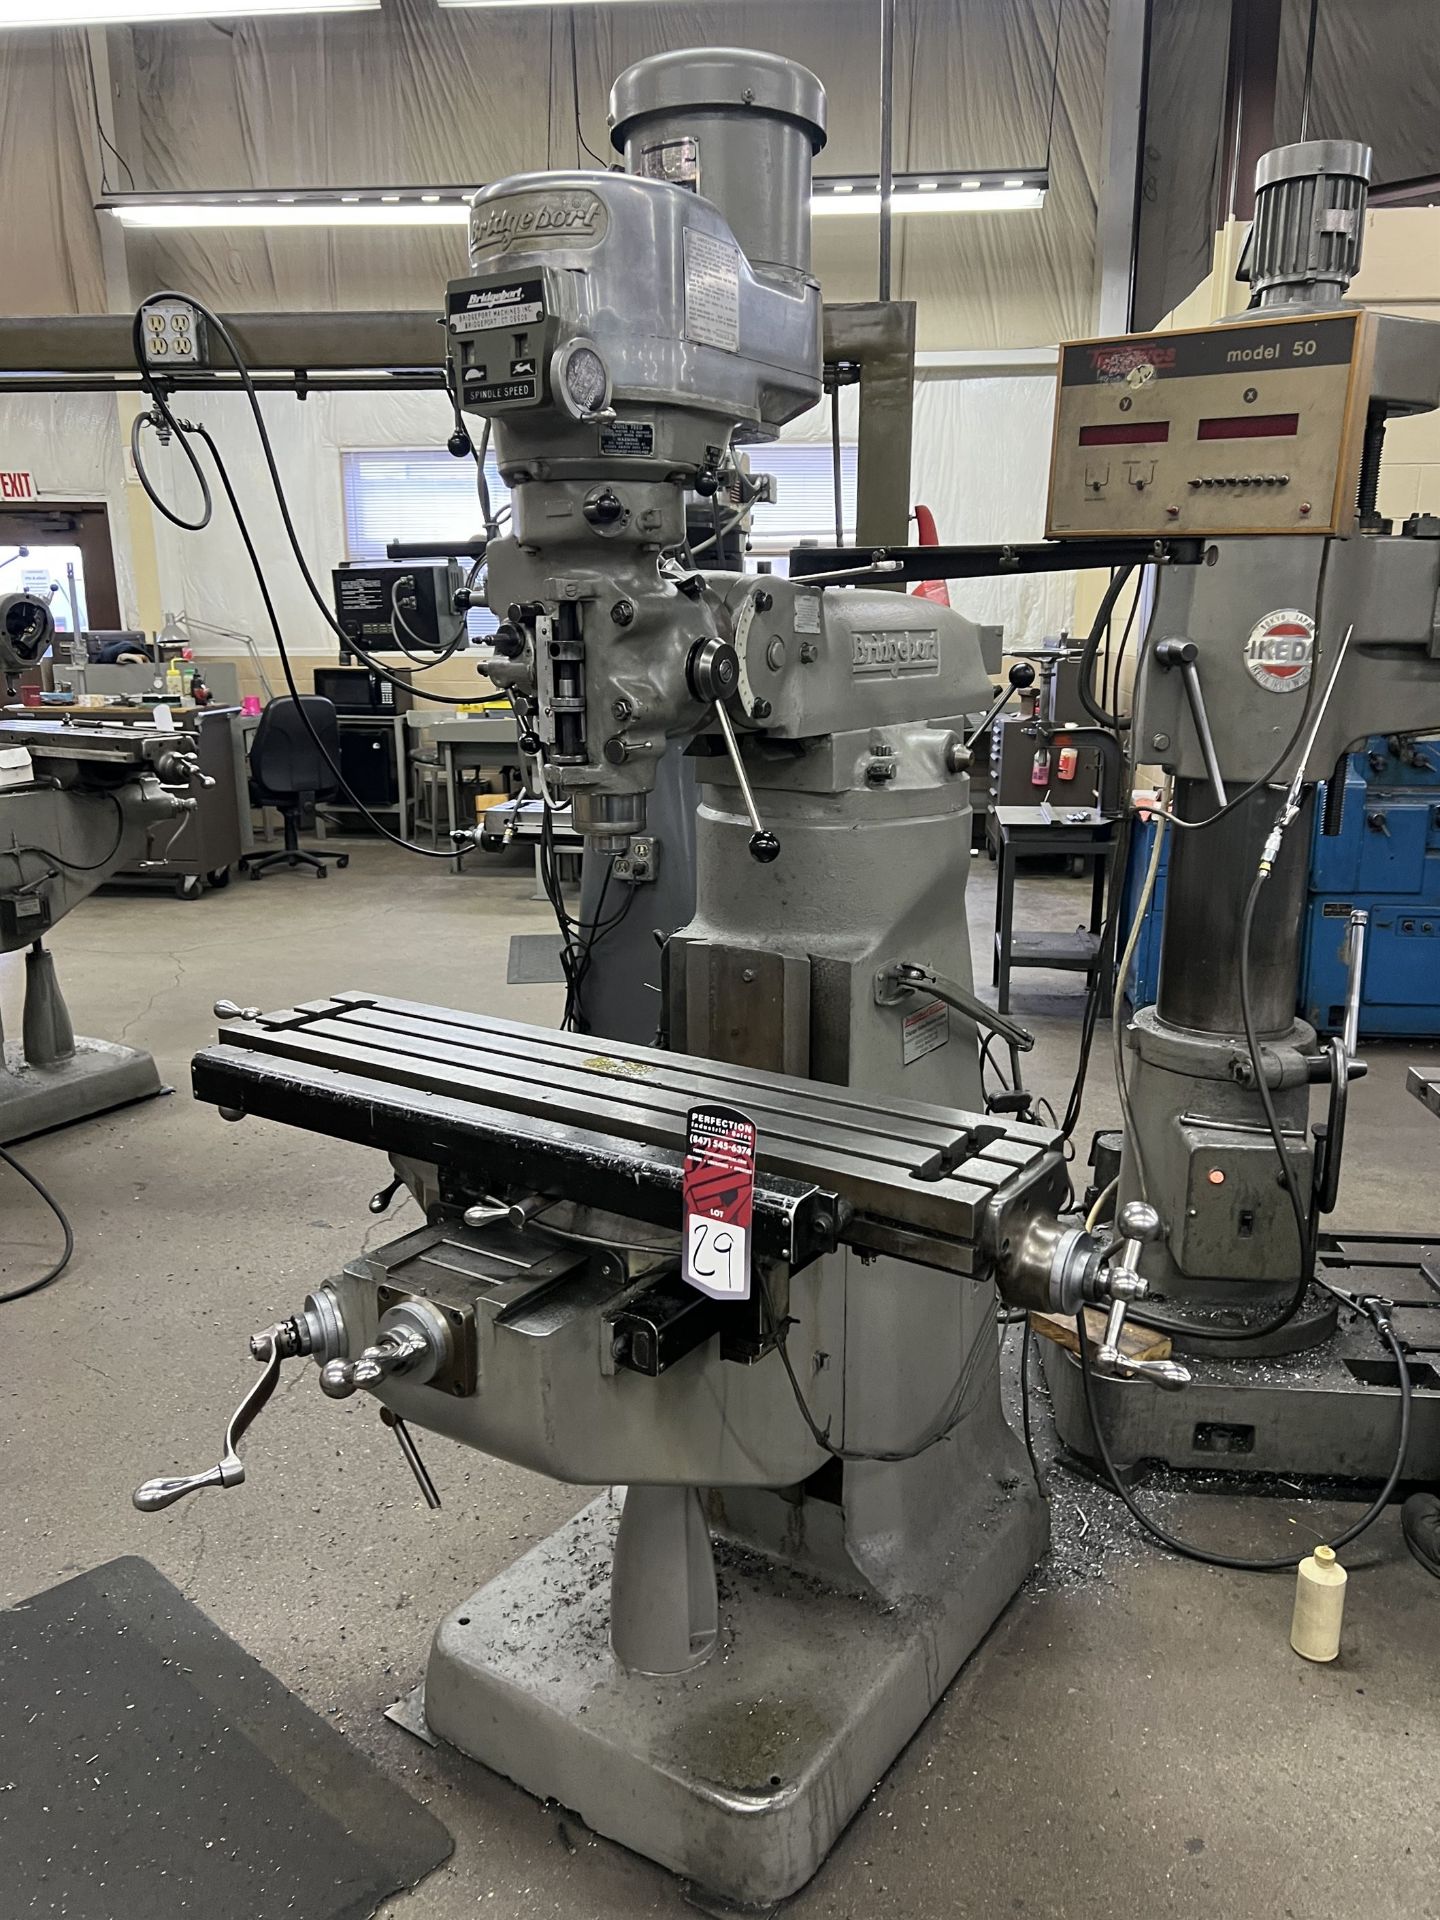 BRIDGEPORT Vertical Milling Machine, s/n 210898, 9" x 42" Table, Trionics 50 2-Axis DRO (This lot is